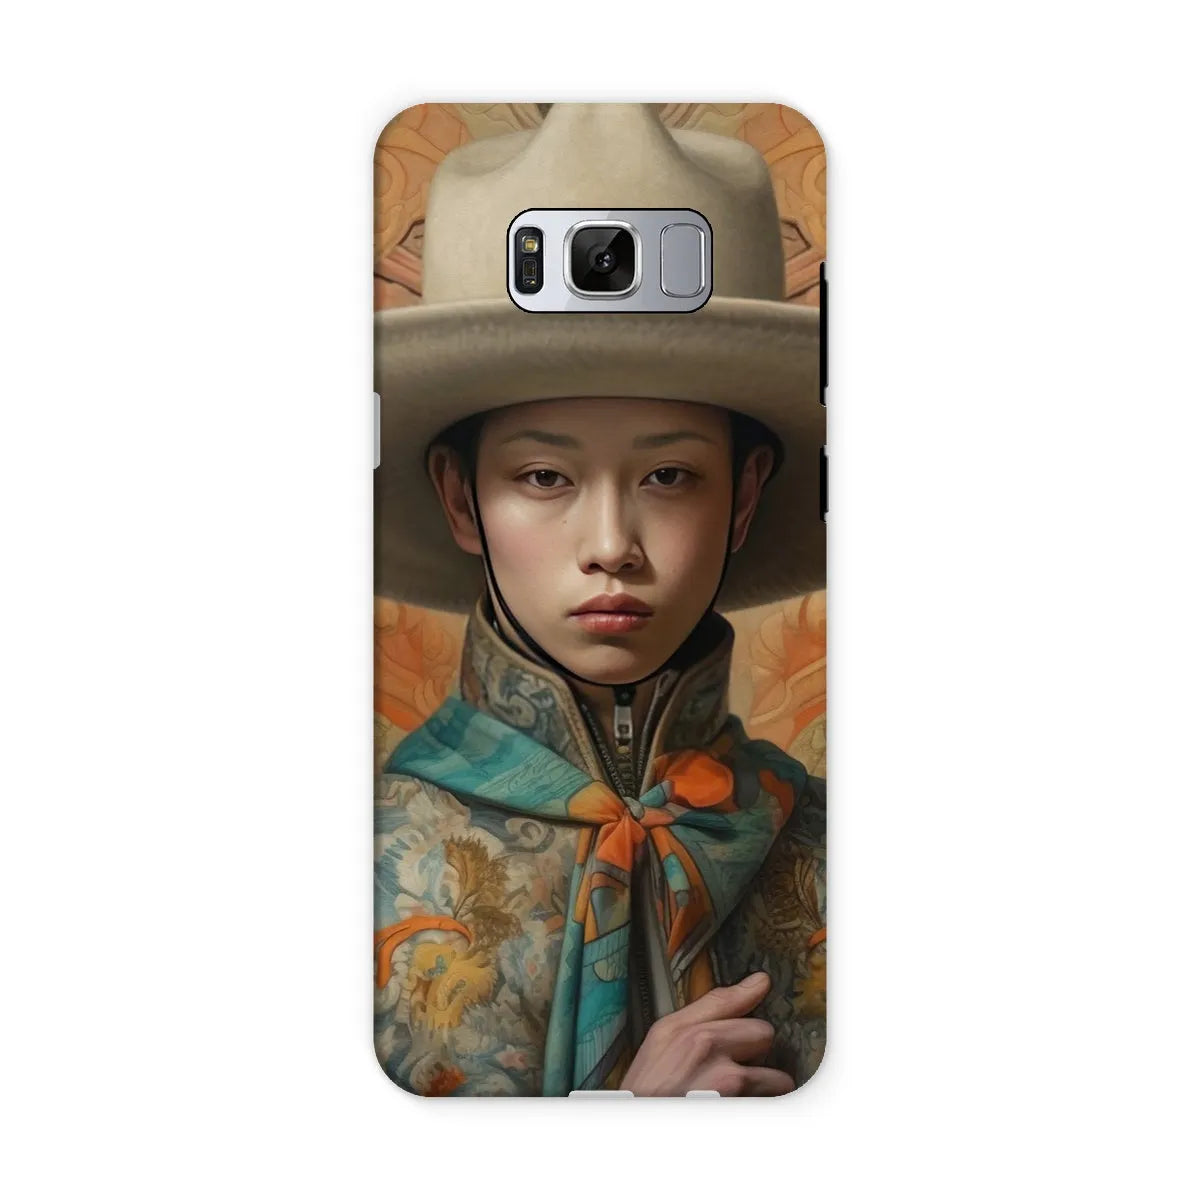 Xiang - Gaysian Chinese Cowboy Aesthetic Art Phone Case - Samsung Galaxy S8 / Matte - Mobile Phone Cases - Aesthetic Art